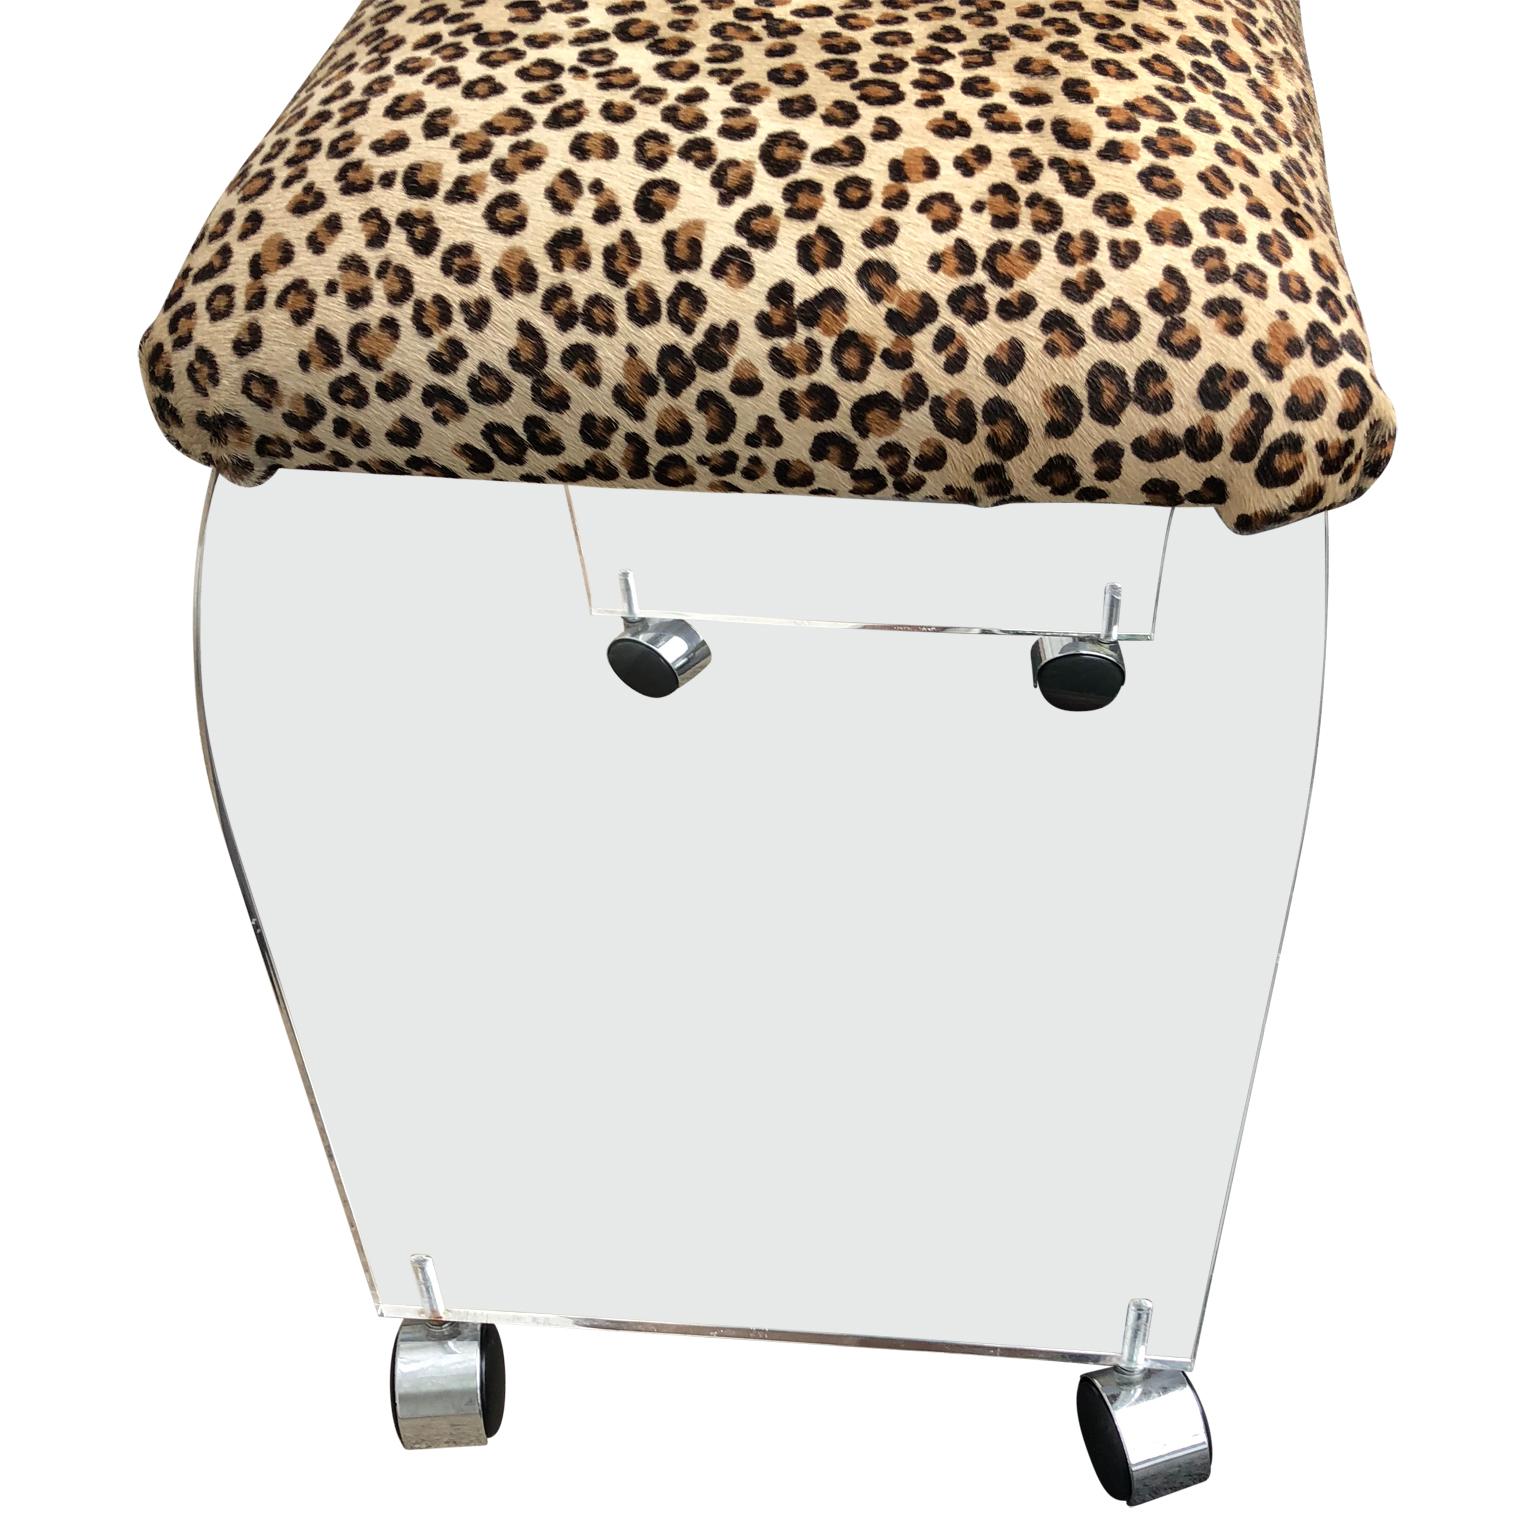 Mid-Century Modern Waterfall Lucite Stool or Bench with Faux Cheetah Fabric In Good Condition For Sale In Haddonfield, NJ